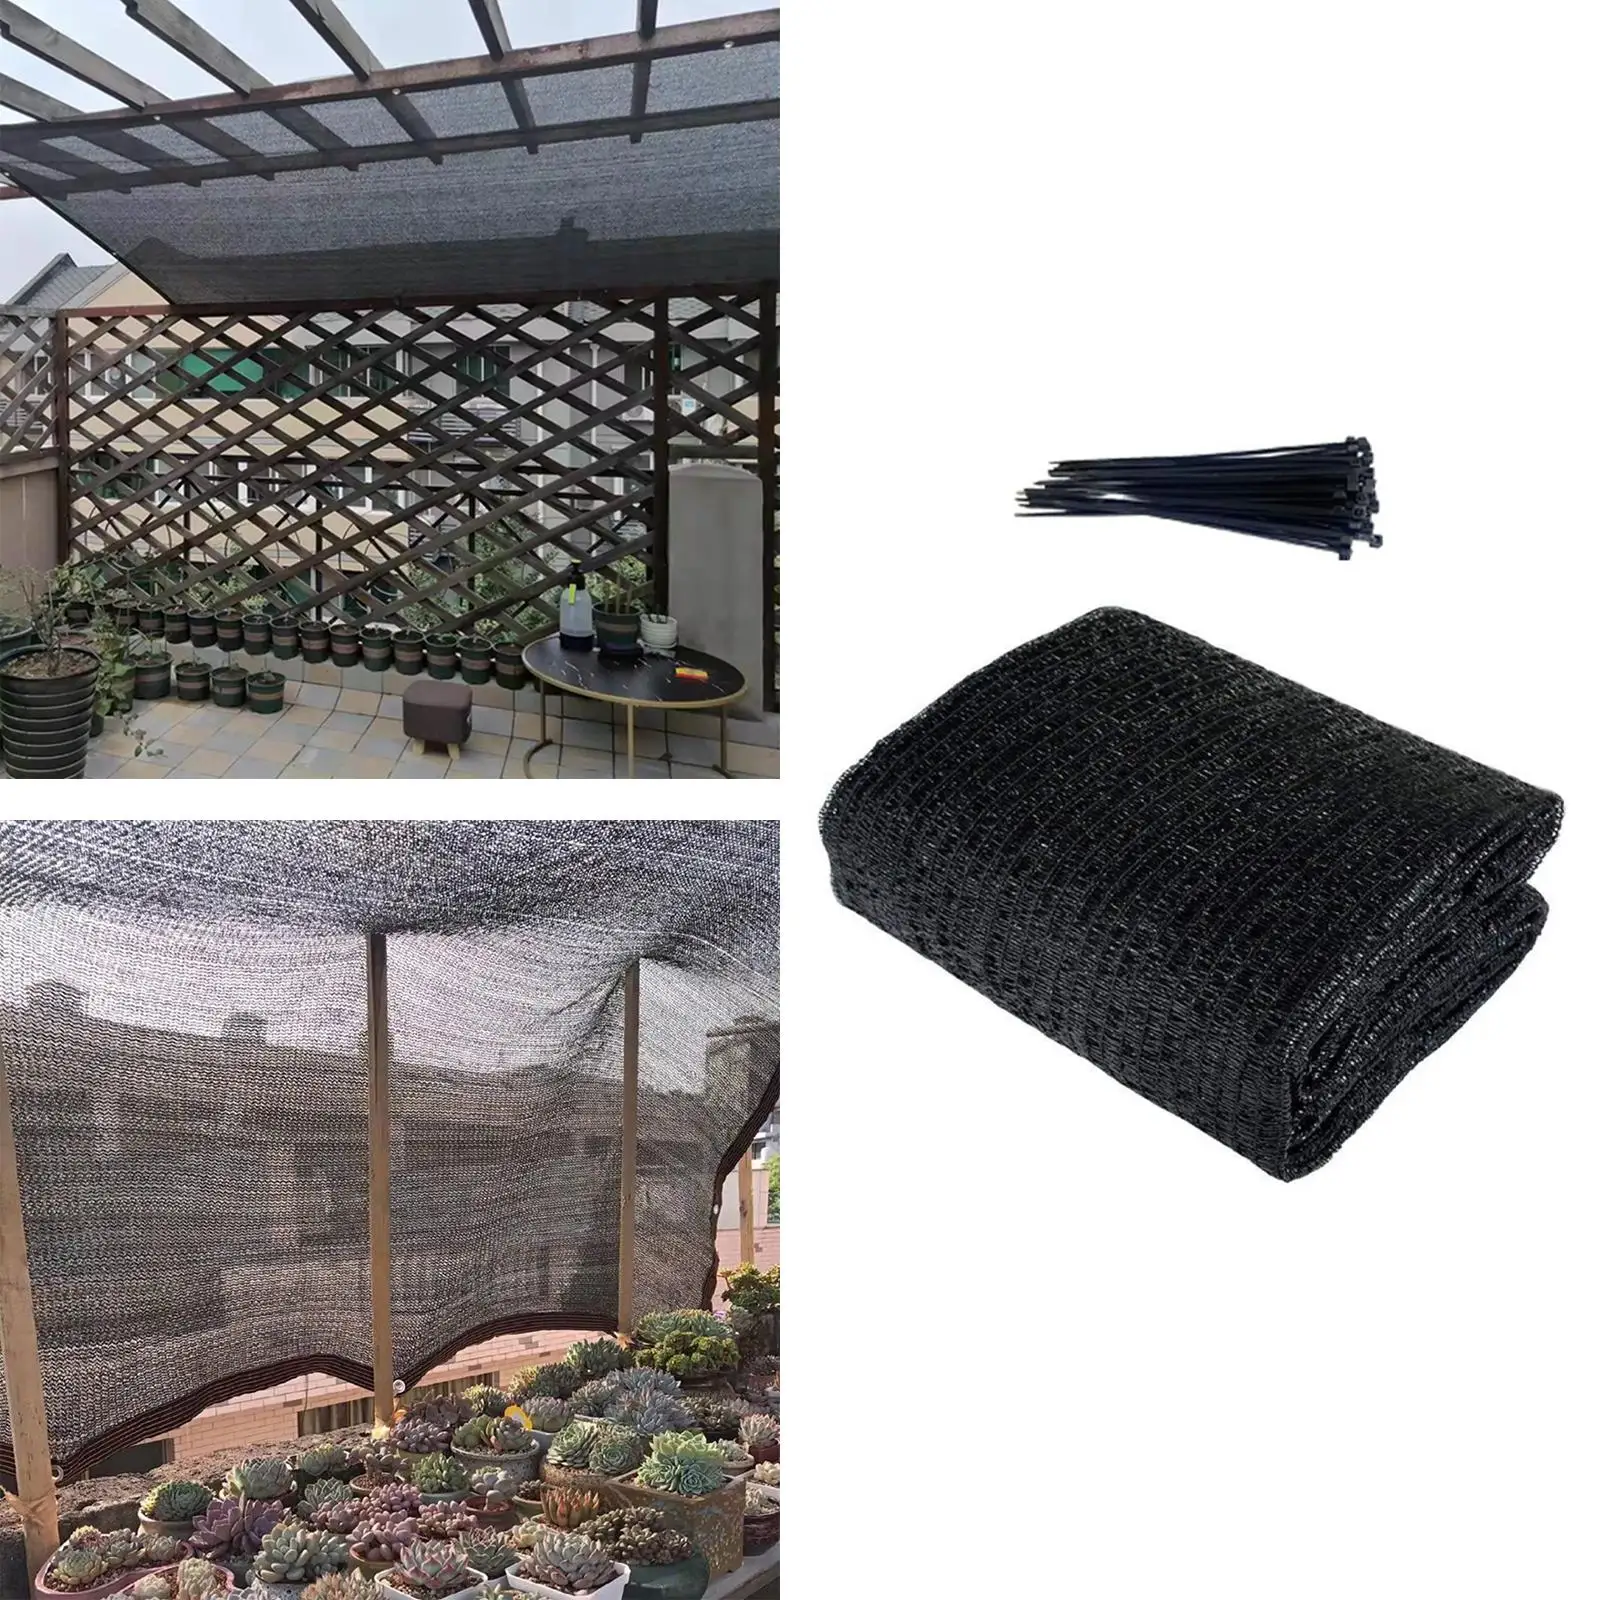 Sunblock Shade Cloth Net,Black Resistant 4x6m Garden Shade Mesh Tarp for Plant Cover,Greenhouse,Chicken Coop,Tomatoes,Plants